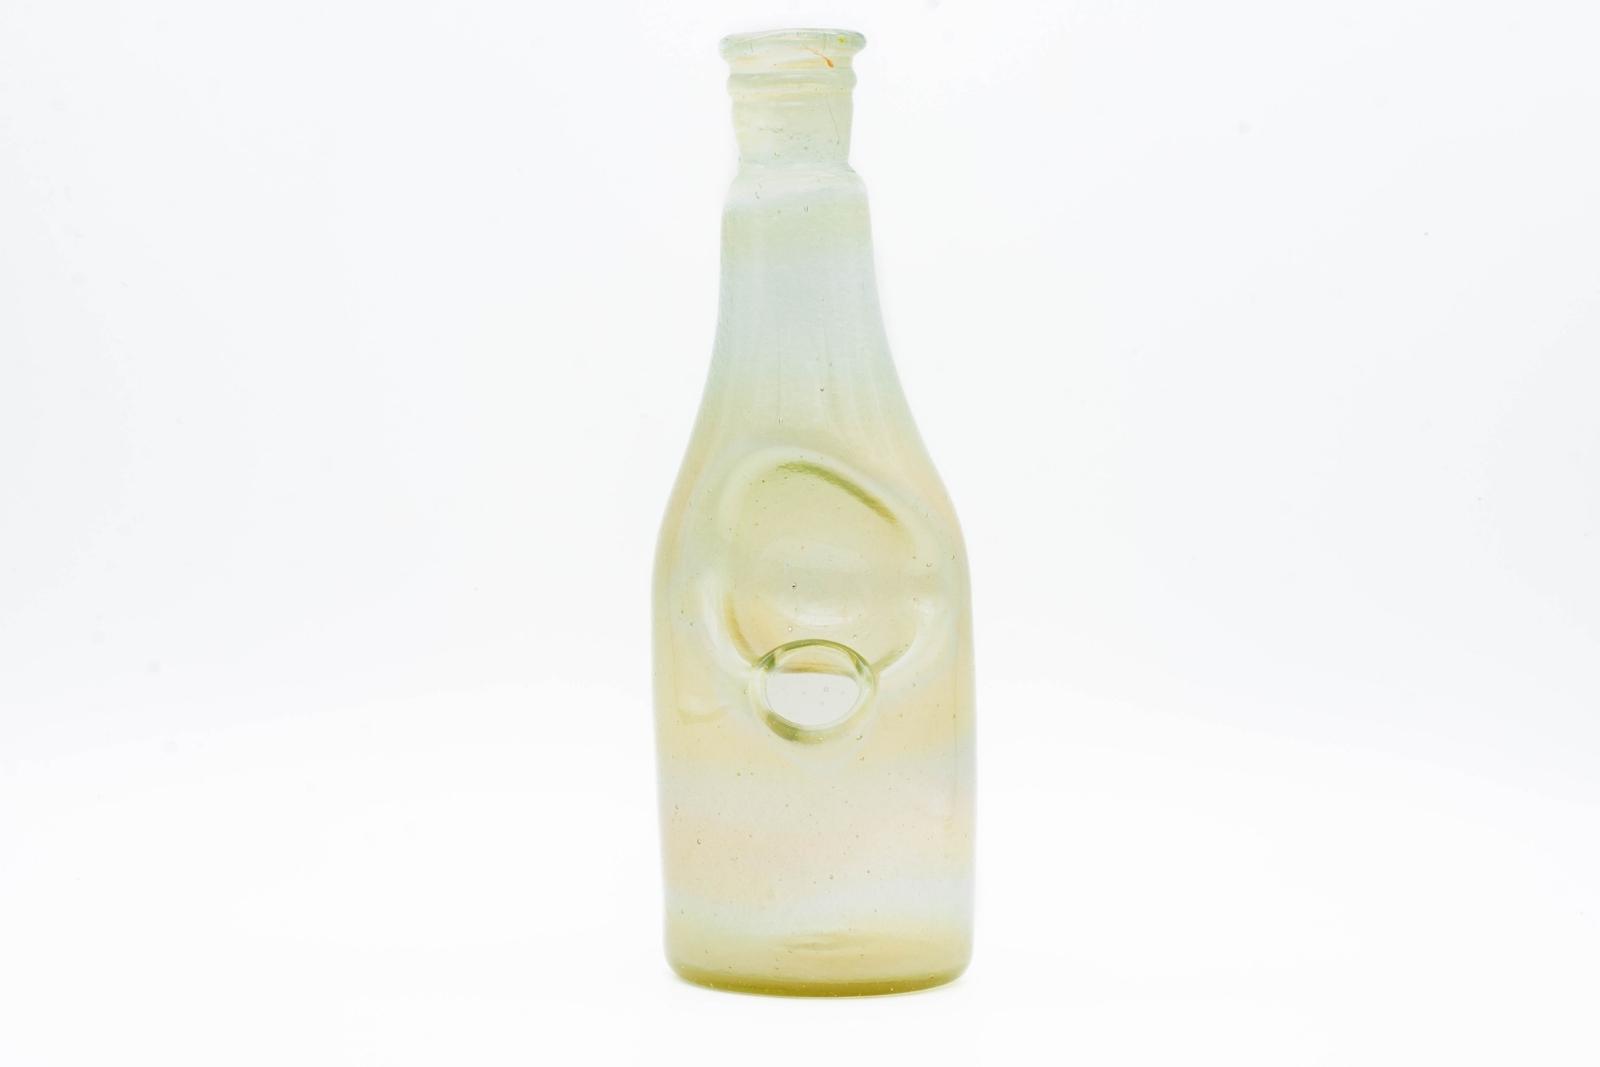 A satin sake bottle rig by Costa Glass, on a white background